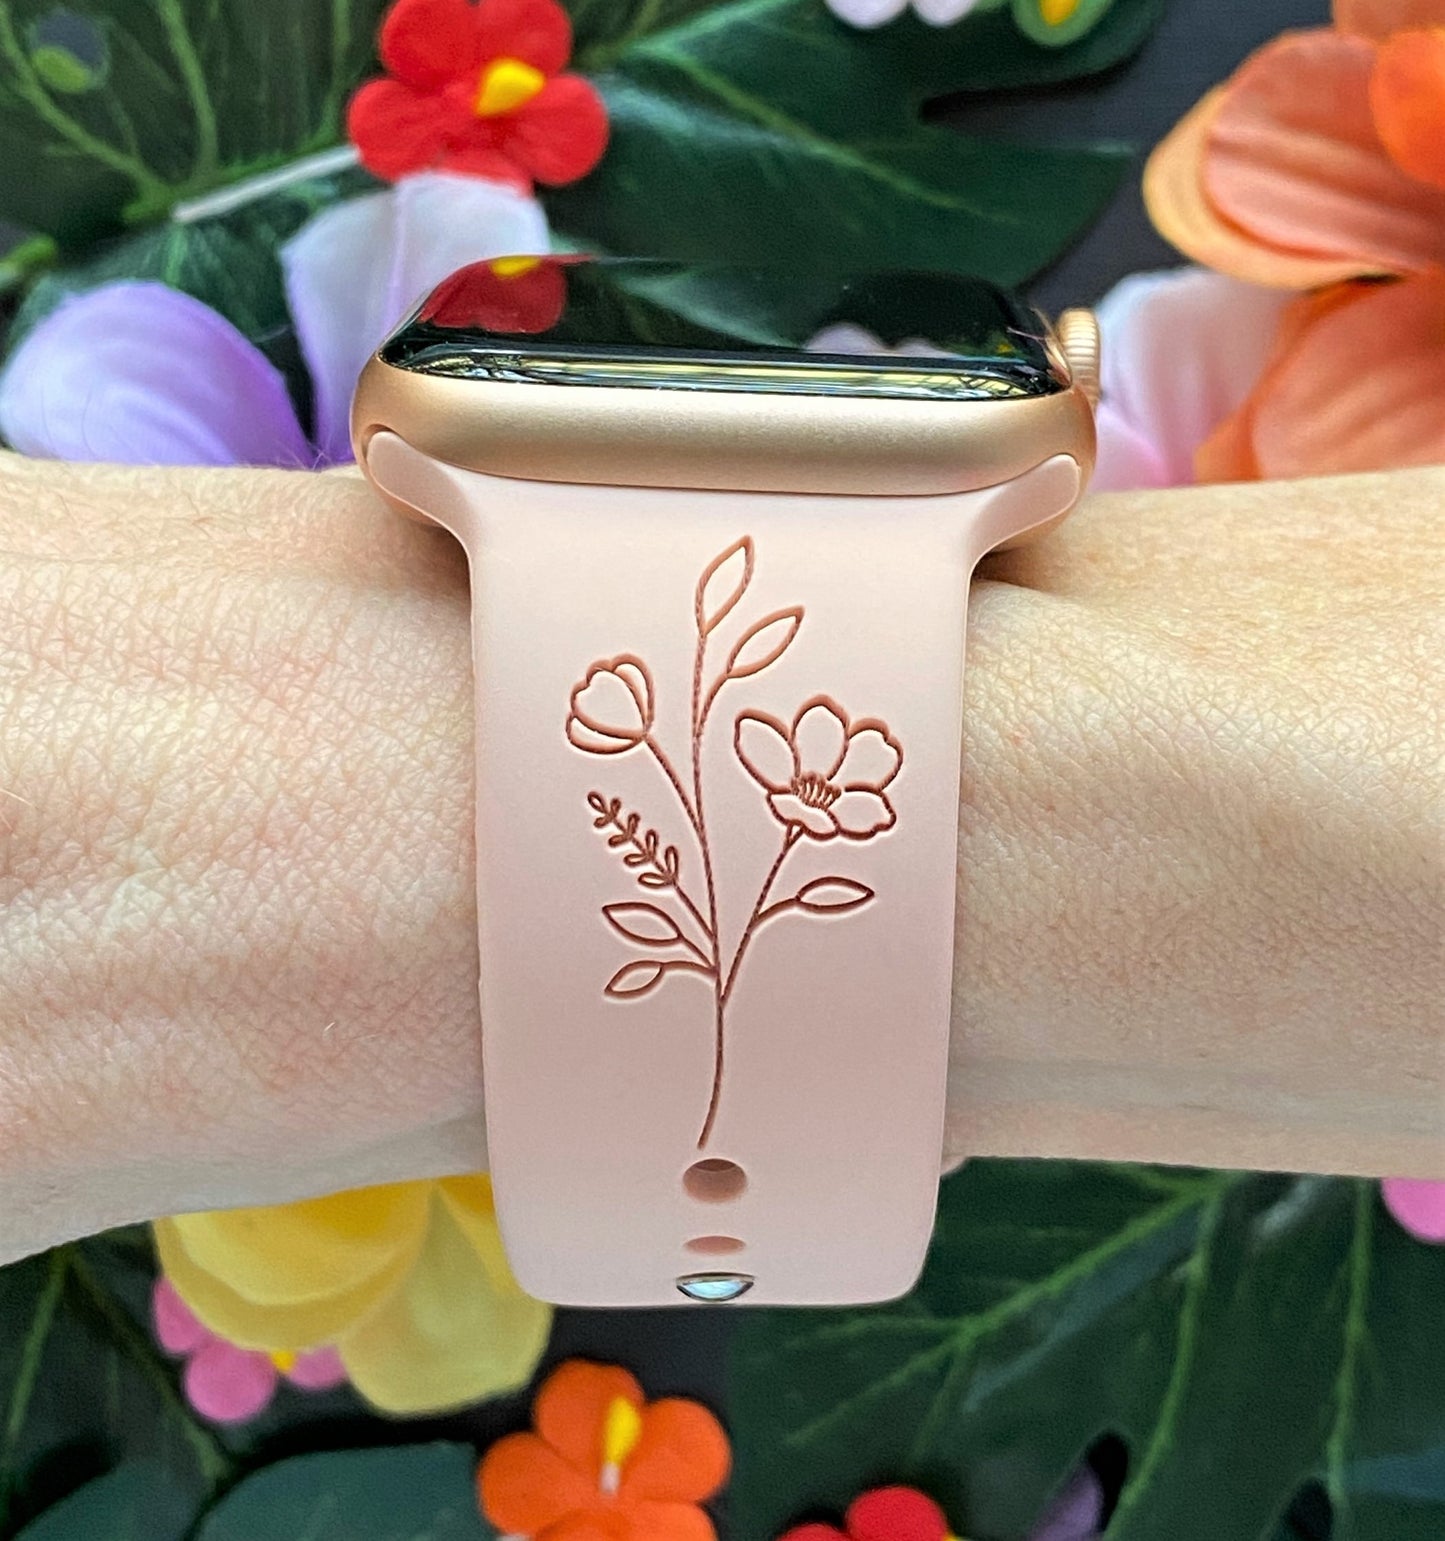 Tropical Flower Apple Watch Band